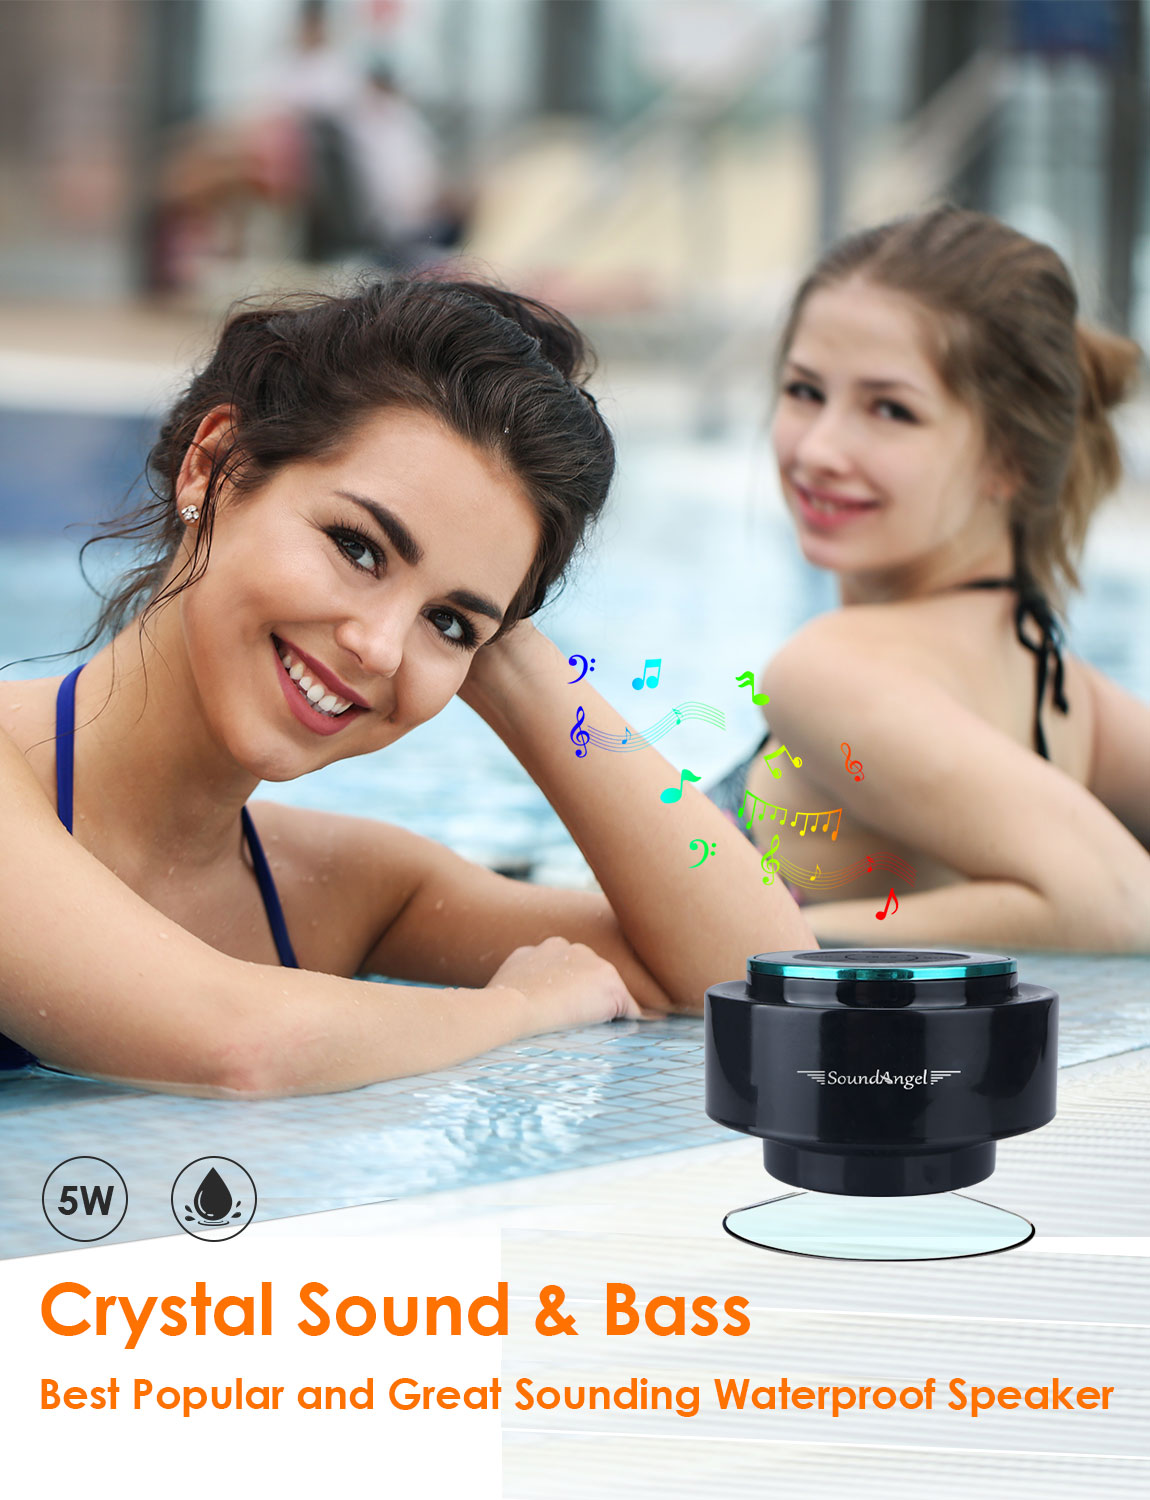 XLeader SoundAngel Mate - Premium 5W Bluetooth Shower Speaker IPX7 Waterproof Speaker with Suction Cup, 3D Crystal Sound & Bass, Perfect Mini Wireless Speakers for iPhone Pool Bathroom Gift-Blue - image 4 of 7